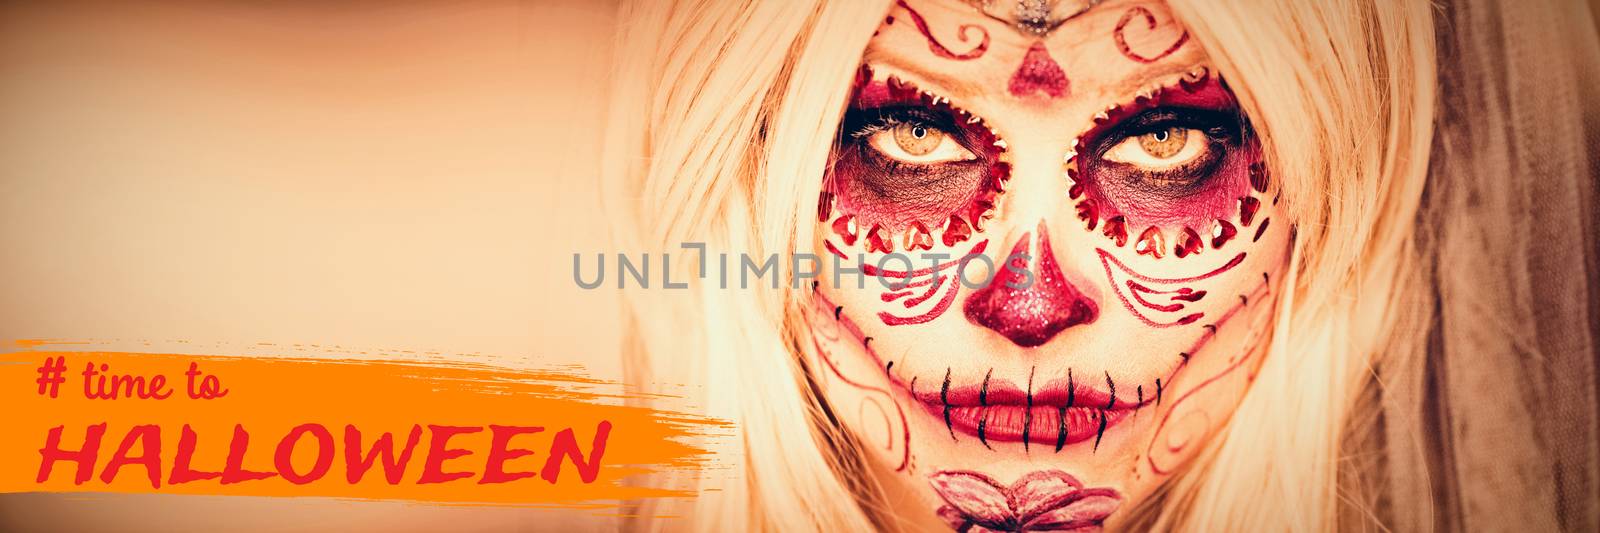 Composite image of graphic image of time to halloween text by Wavebreakmedia